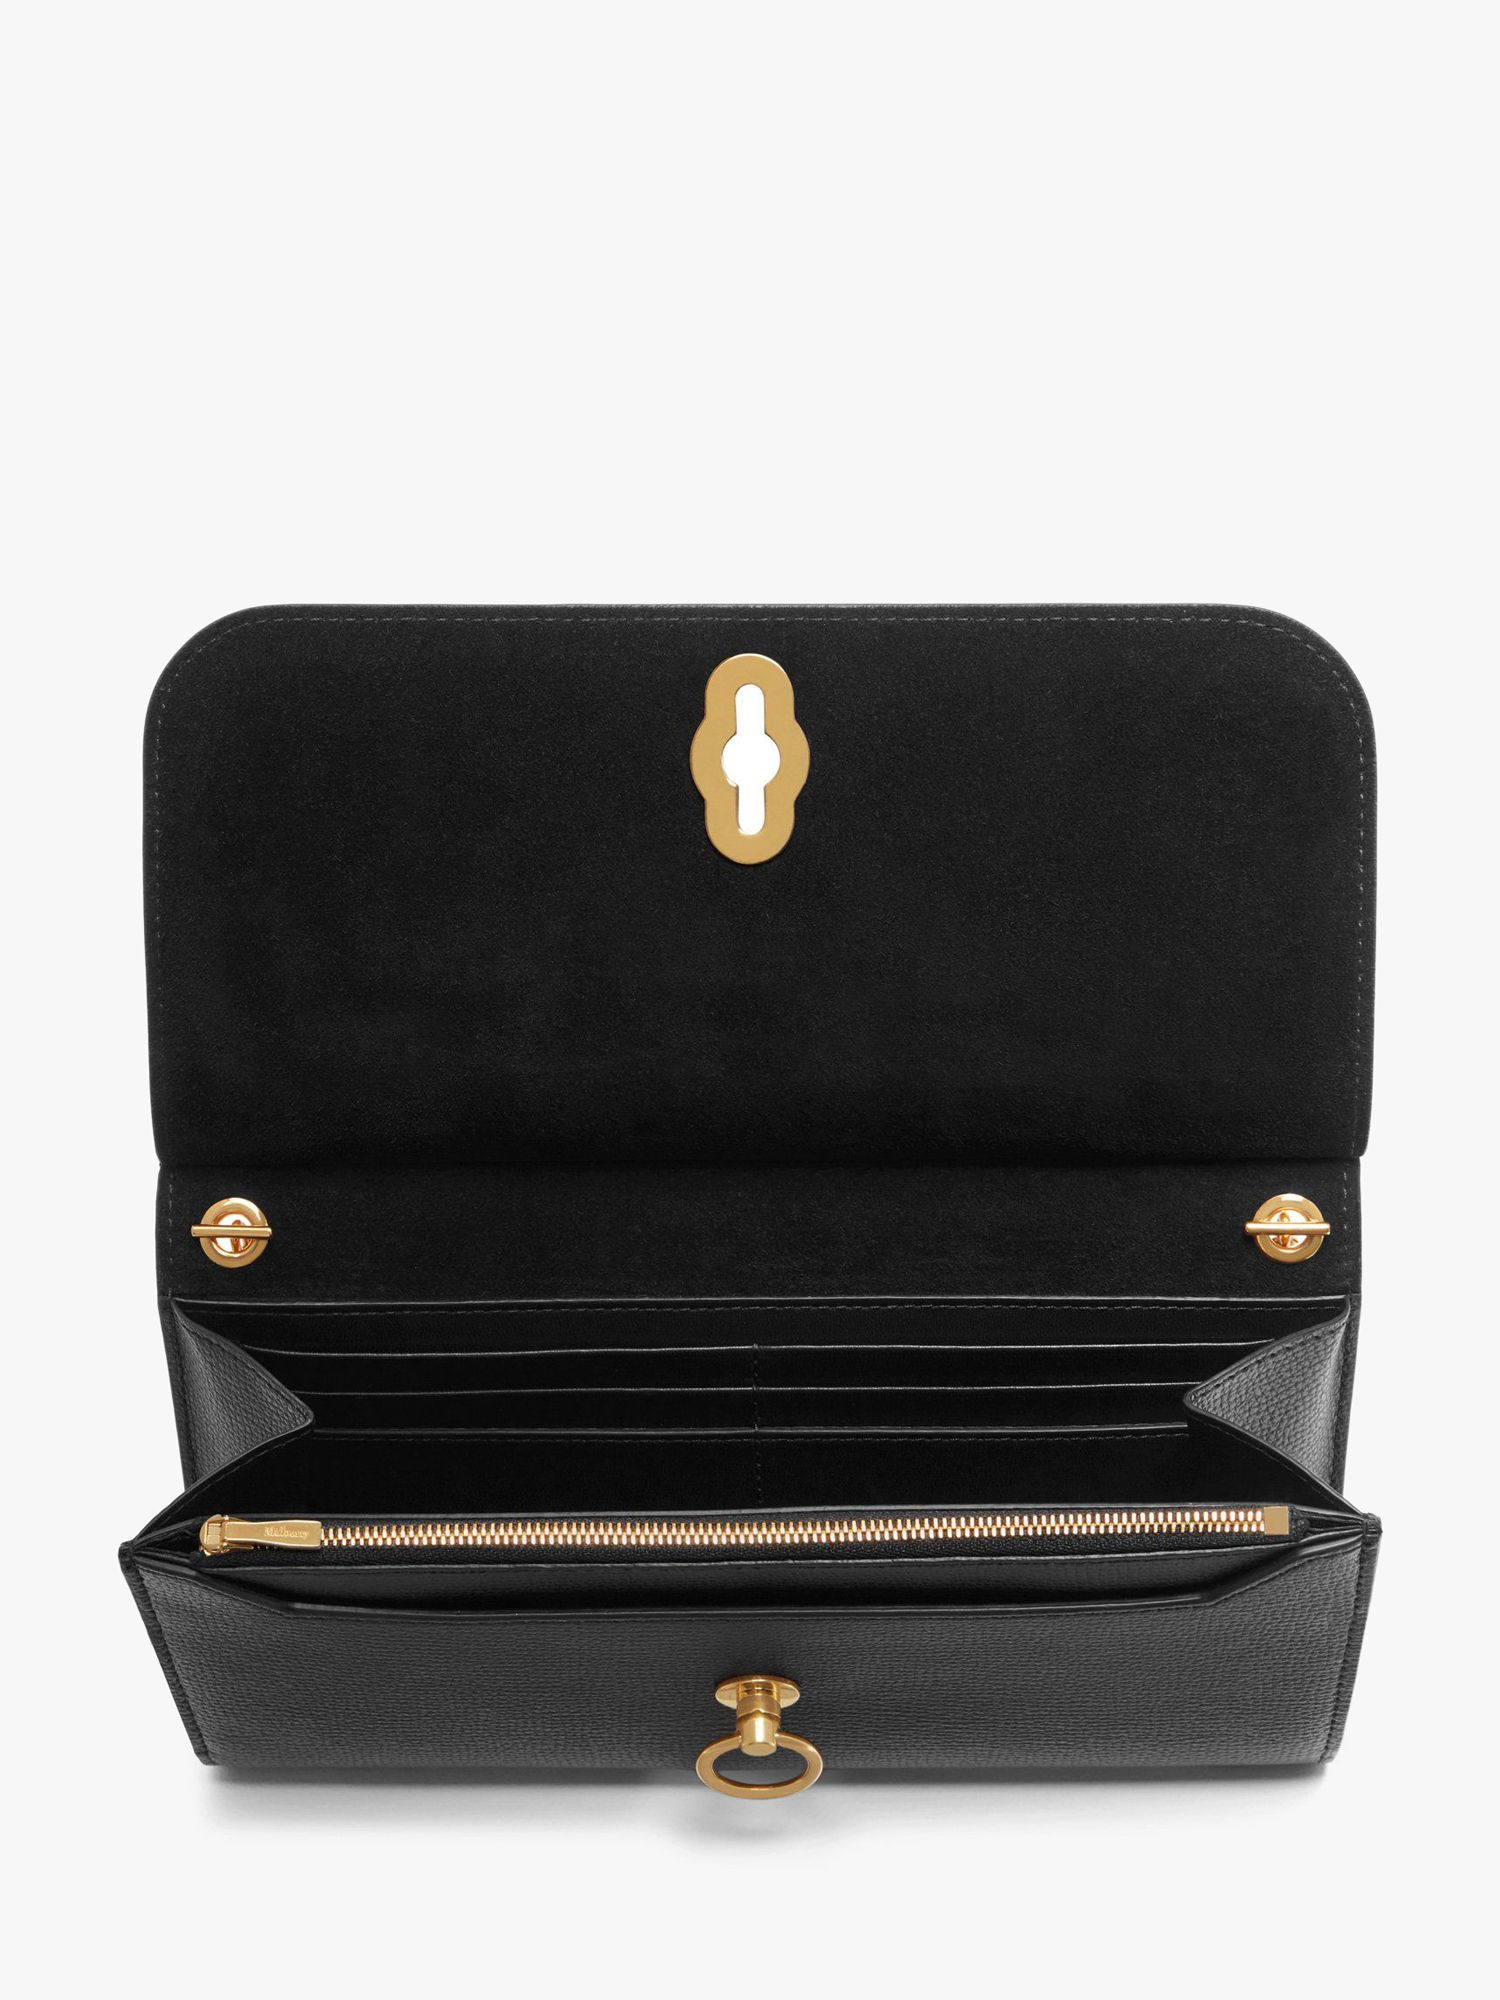 Mulberry Amberley Small Classic Grain Leather Clutch Bag, Black